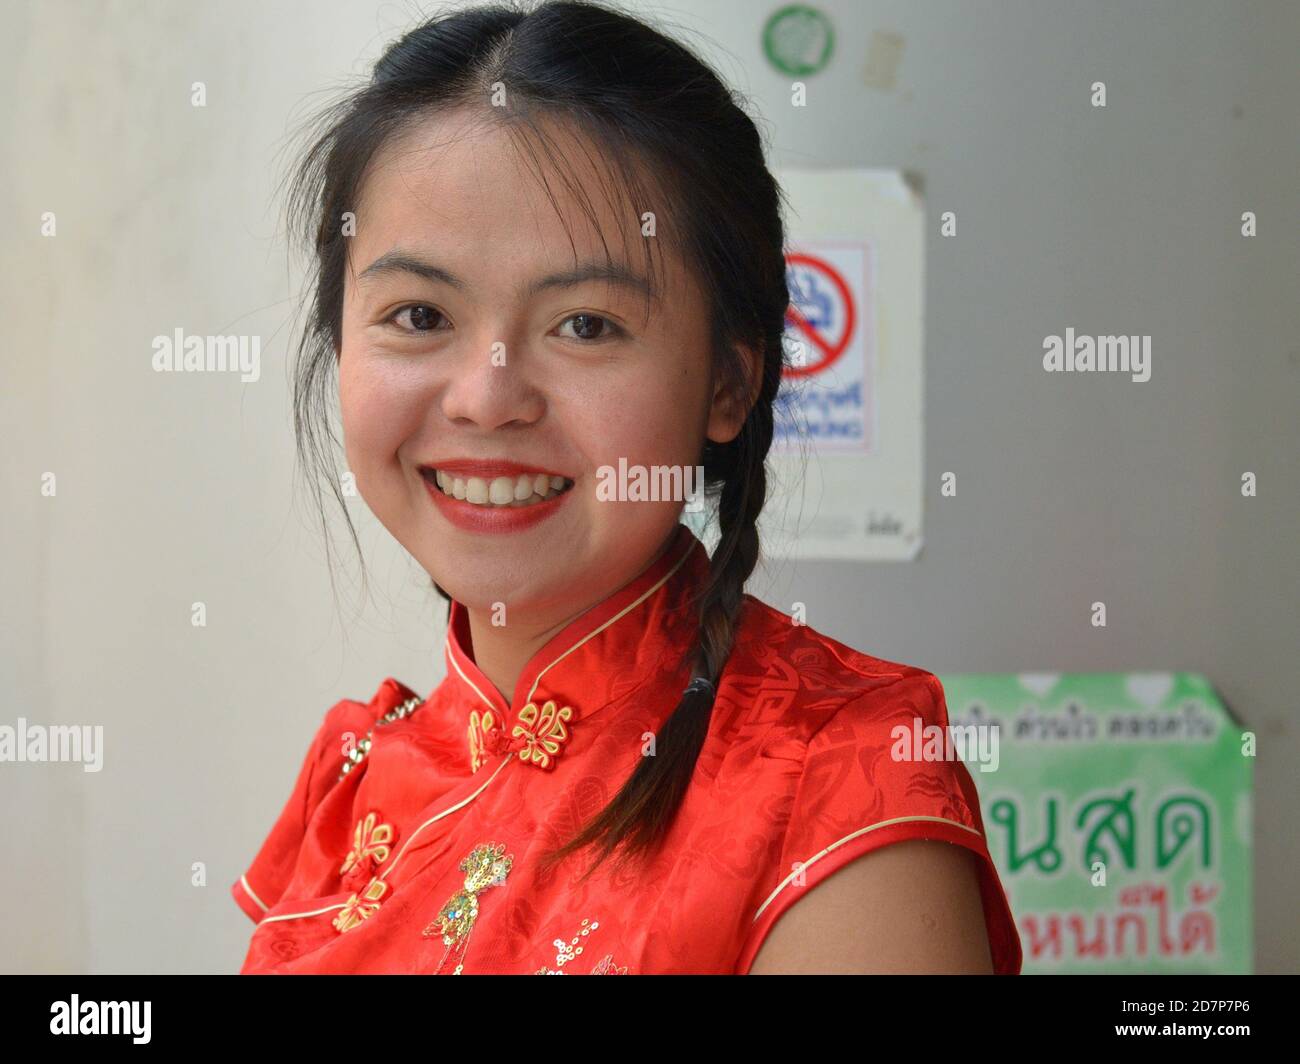 Beautiful young Thai woman with braids wears a red-and-gold traditional Chinese dress (cheongsam) and smiles for the camera during Chinese New Year. Stock Photo